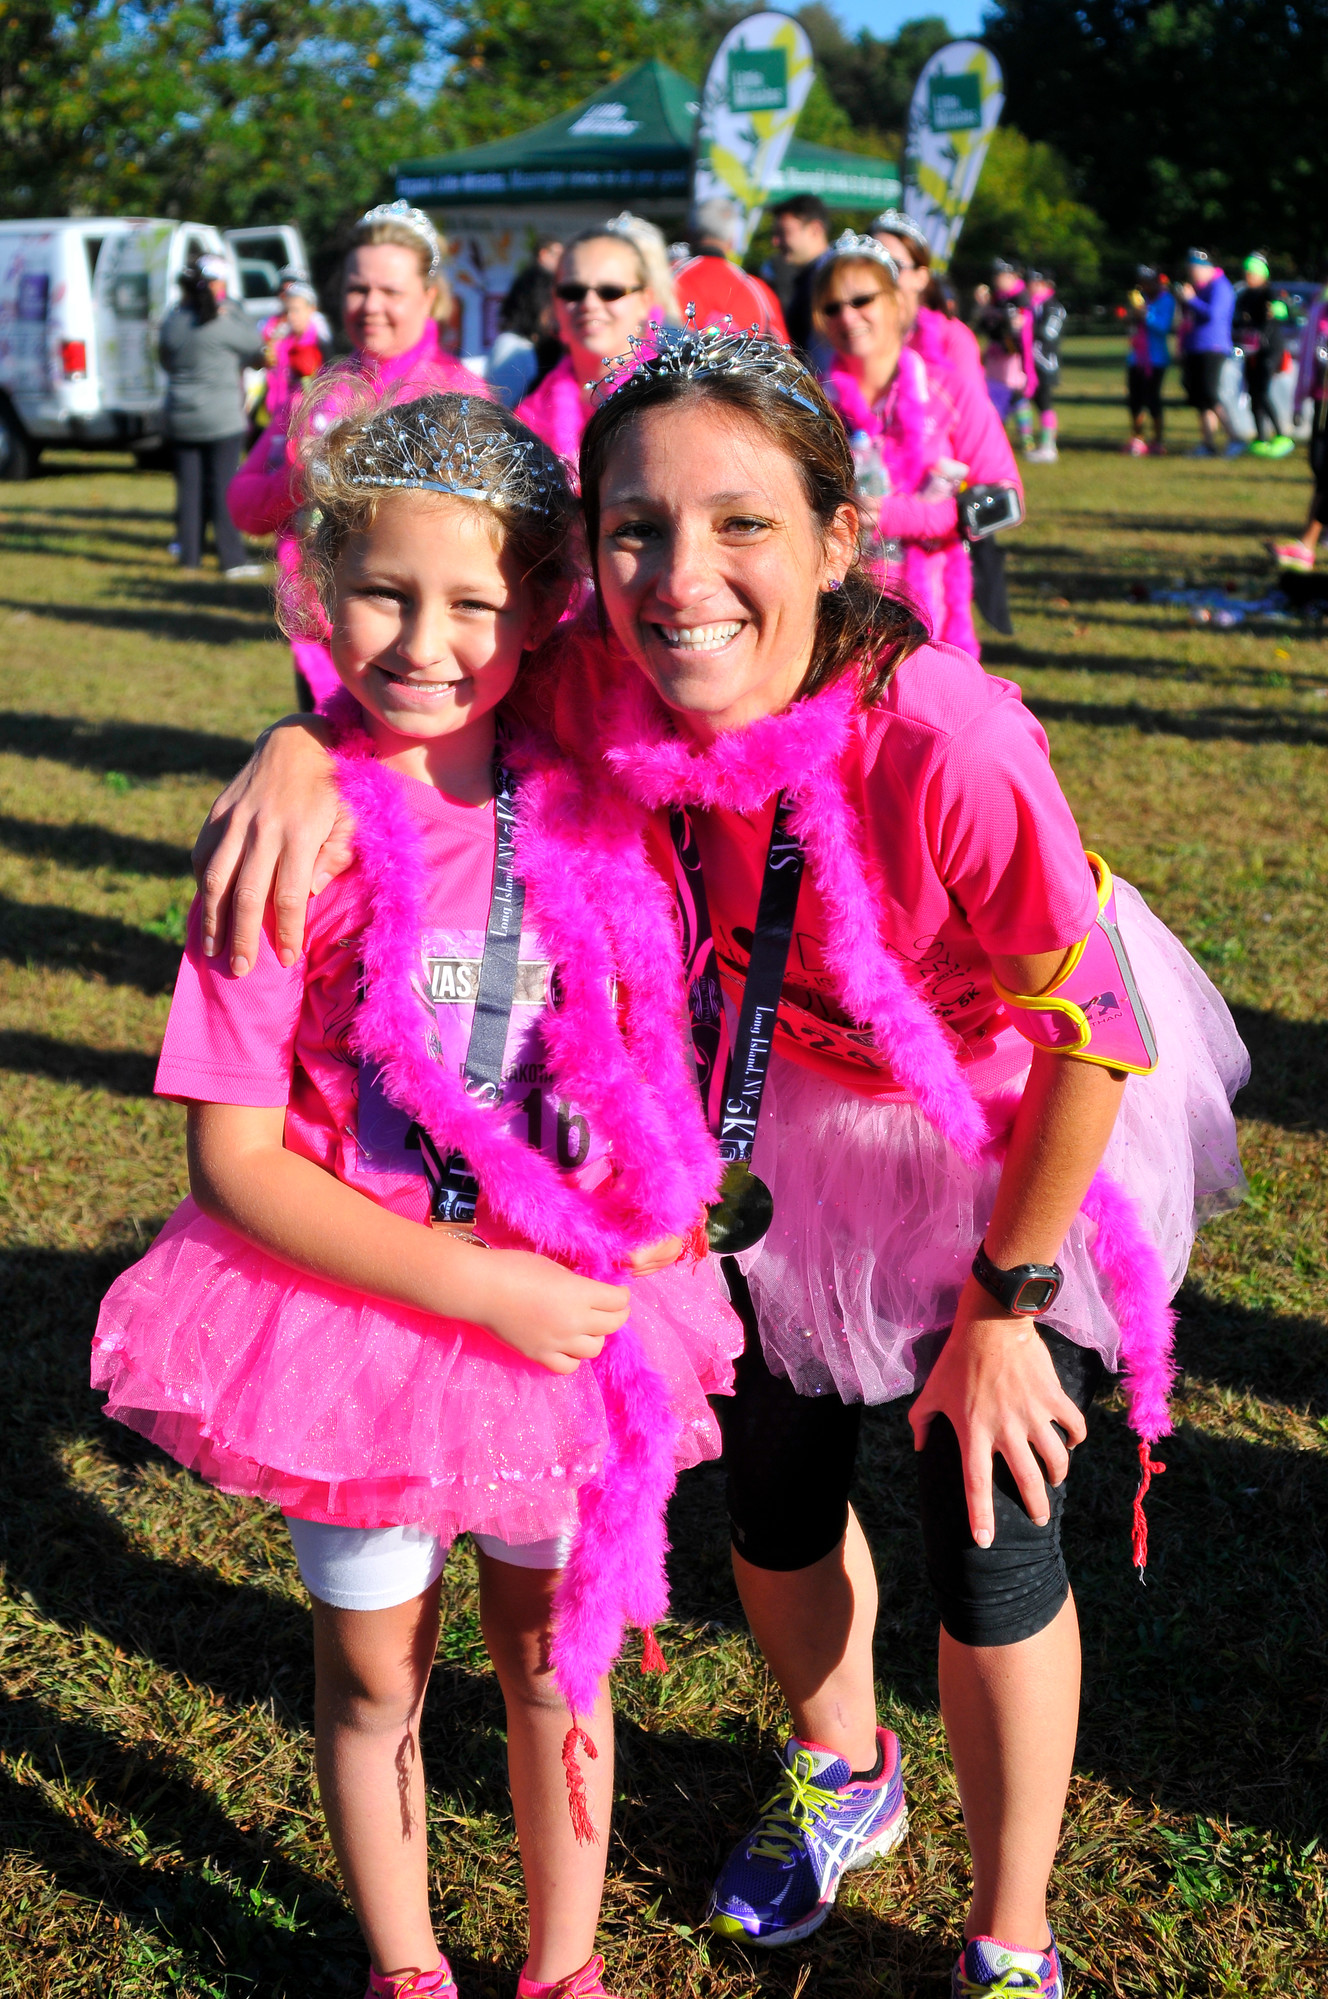 Dakota Hansen, 7, and her mom Megan, of Stony Brook, were happy to have competed in their first Diva Race together. Both finished the 5K run in 43 minutes.